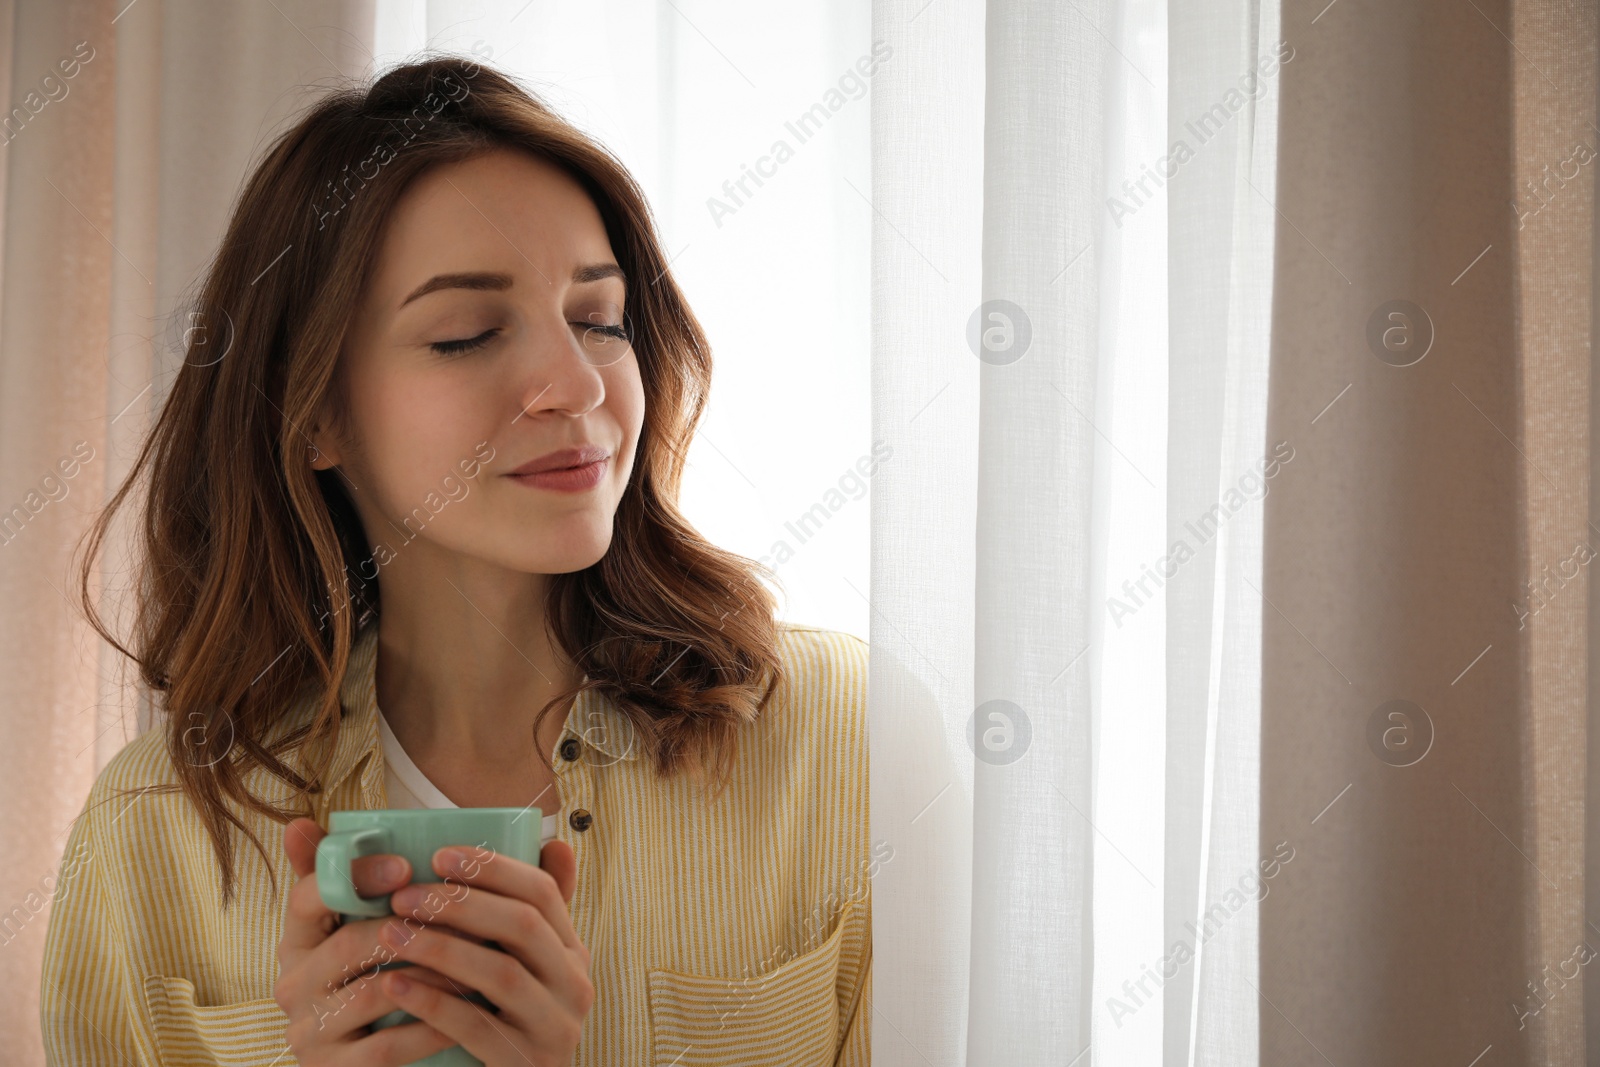 Photo of Woman holding cup near window with beautiful curtains at home